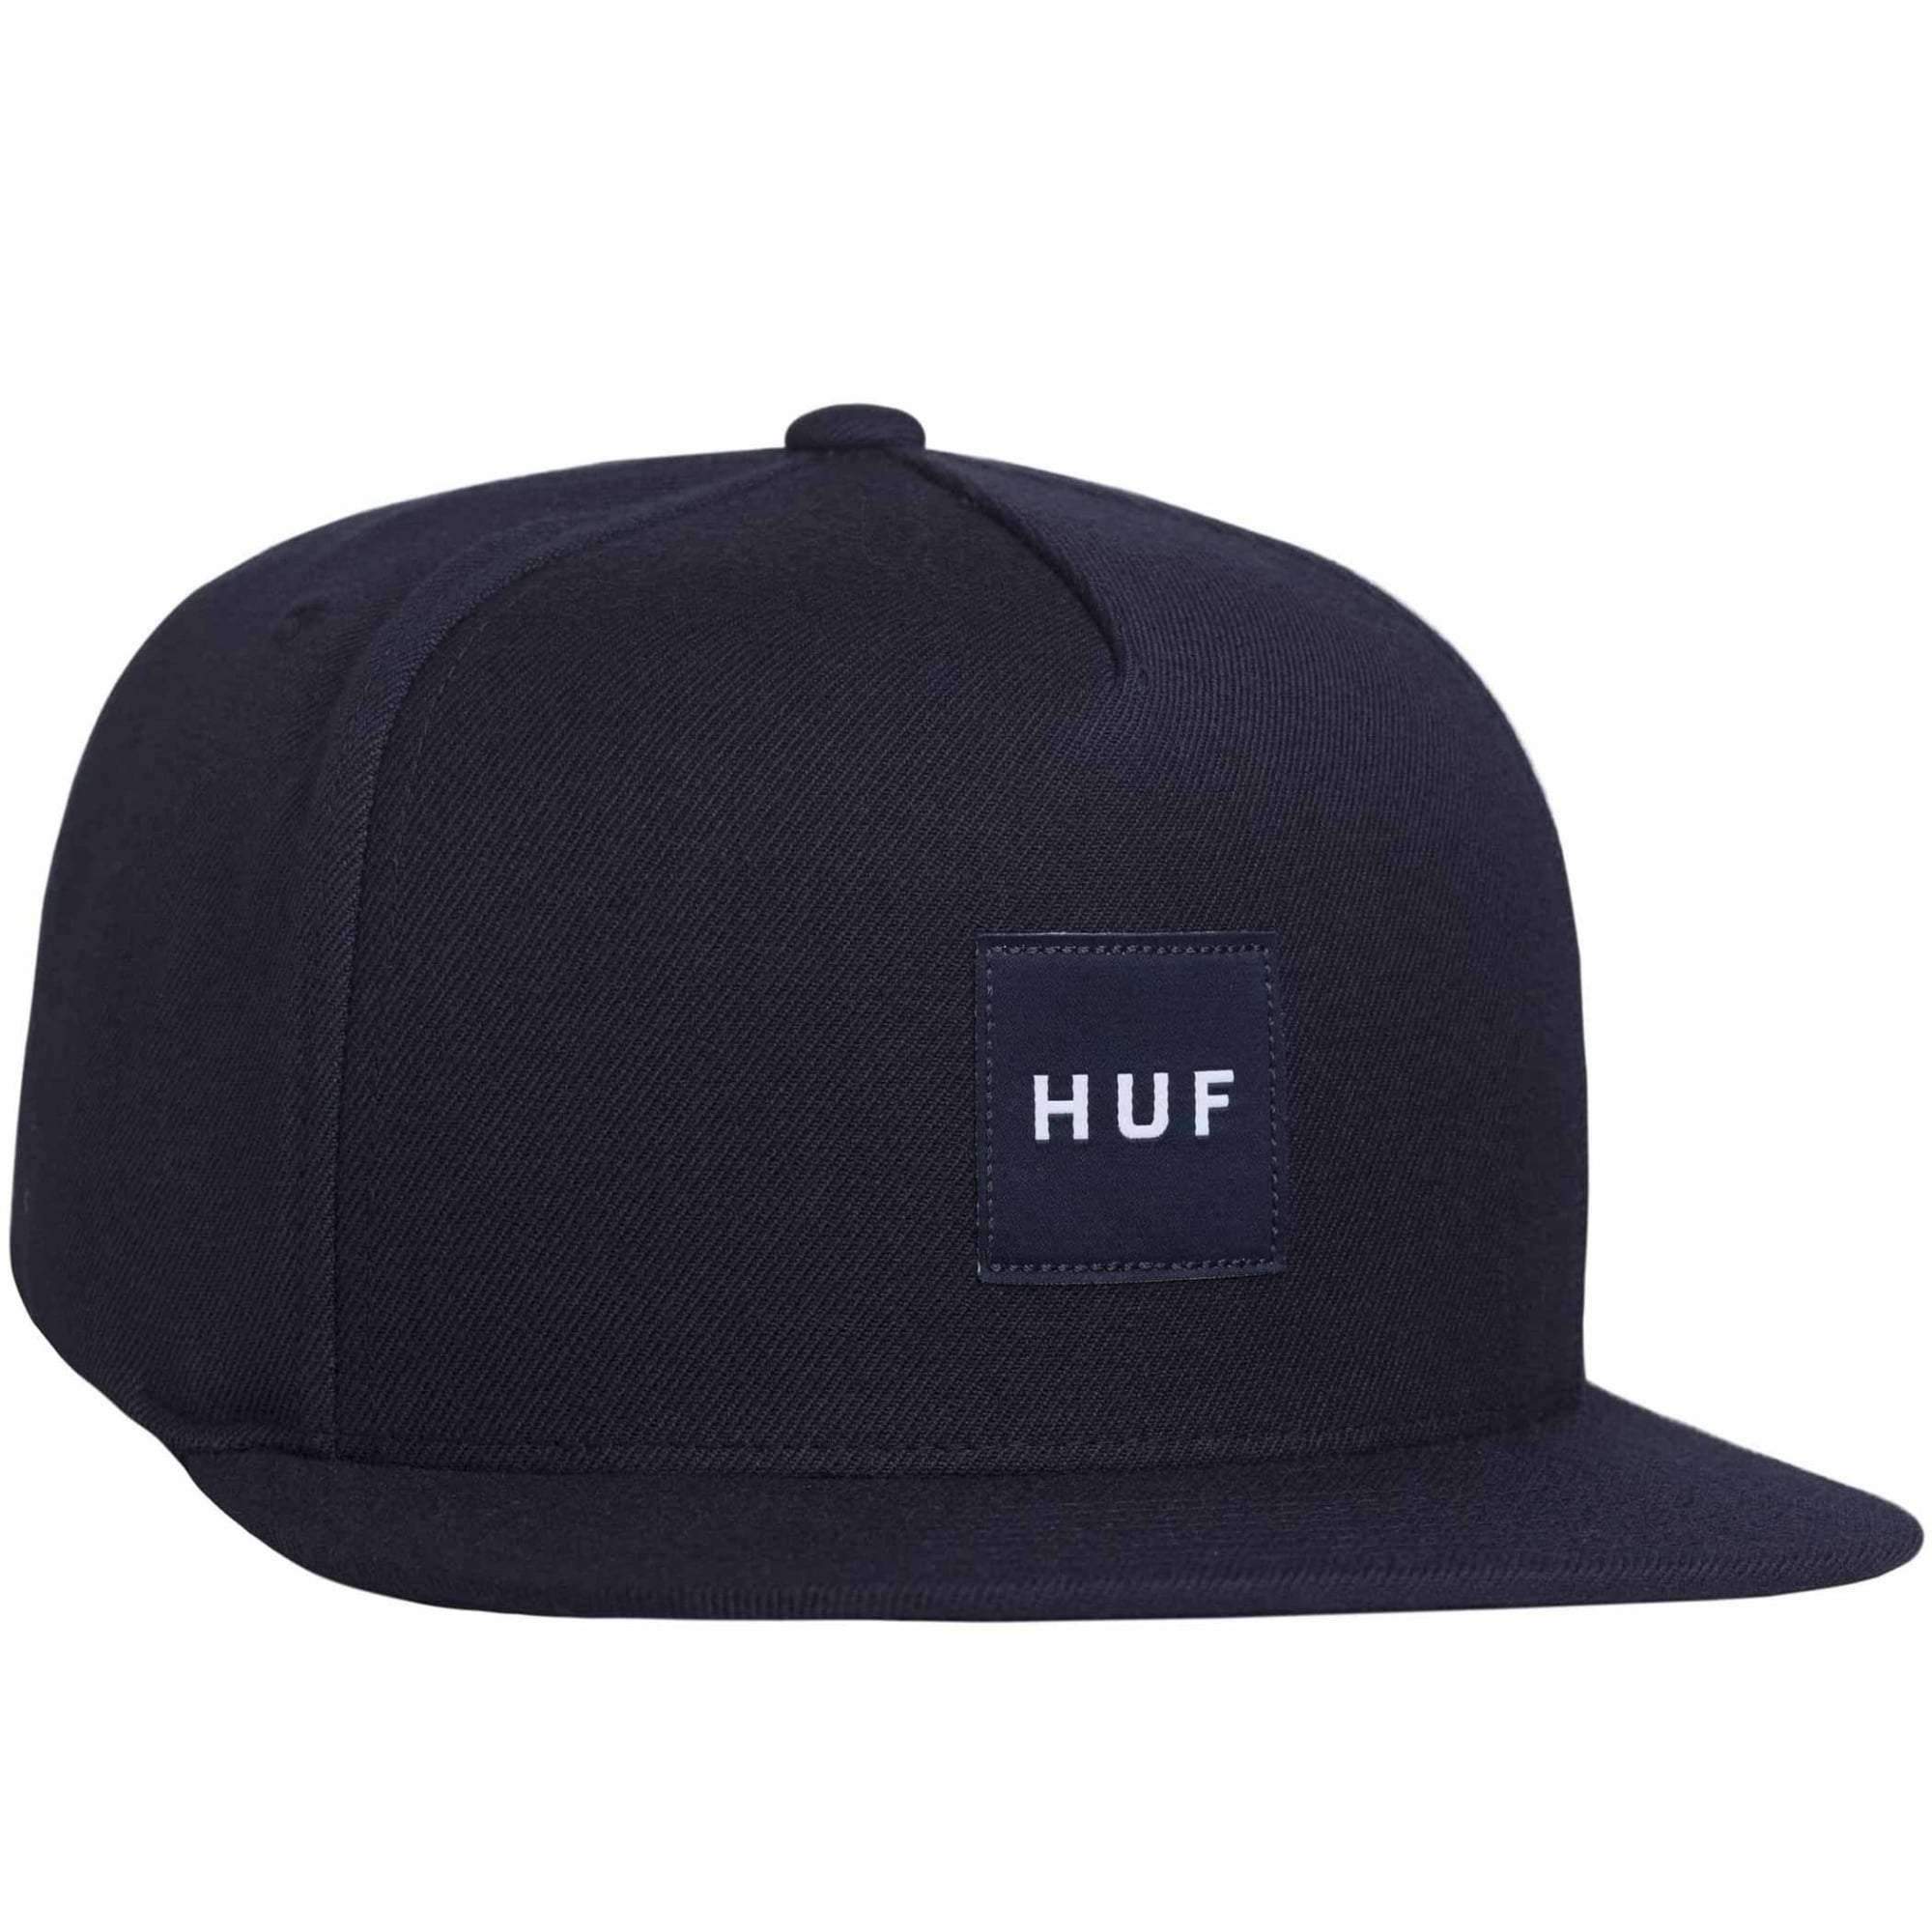 HUF Box Logo - HUF Box Logo Snapback Cap In Midnight. FREE UK Delivery on ALL ORDERS